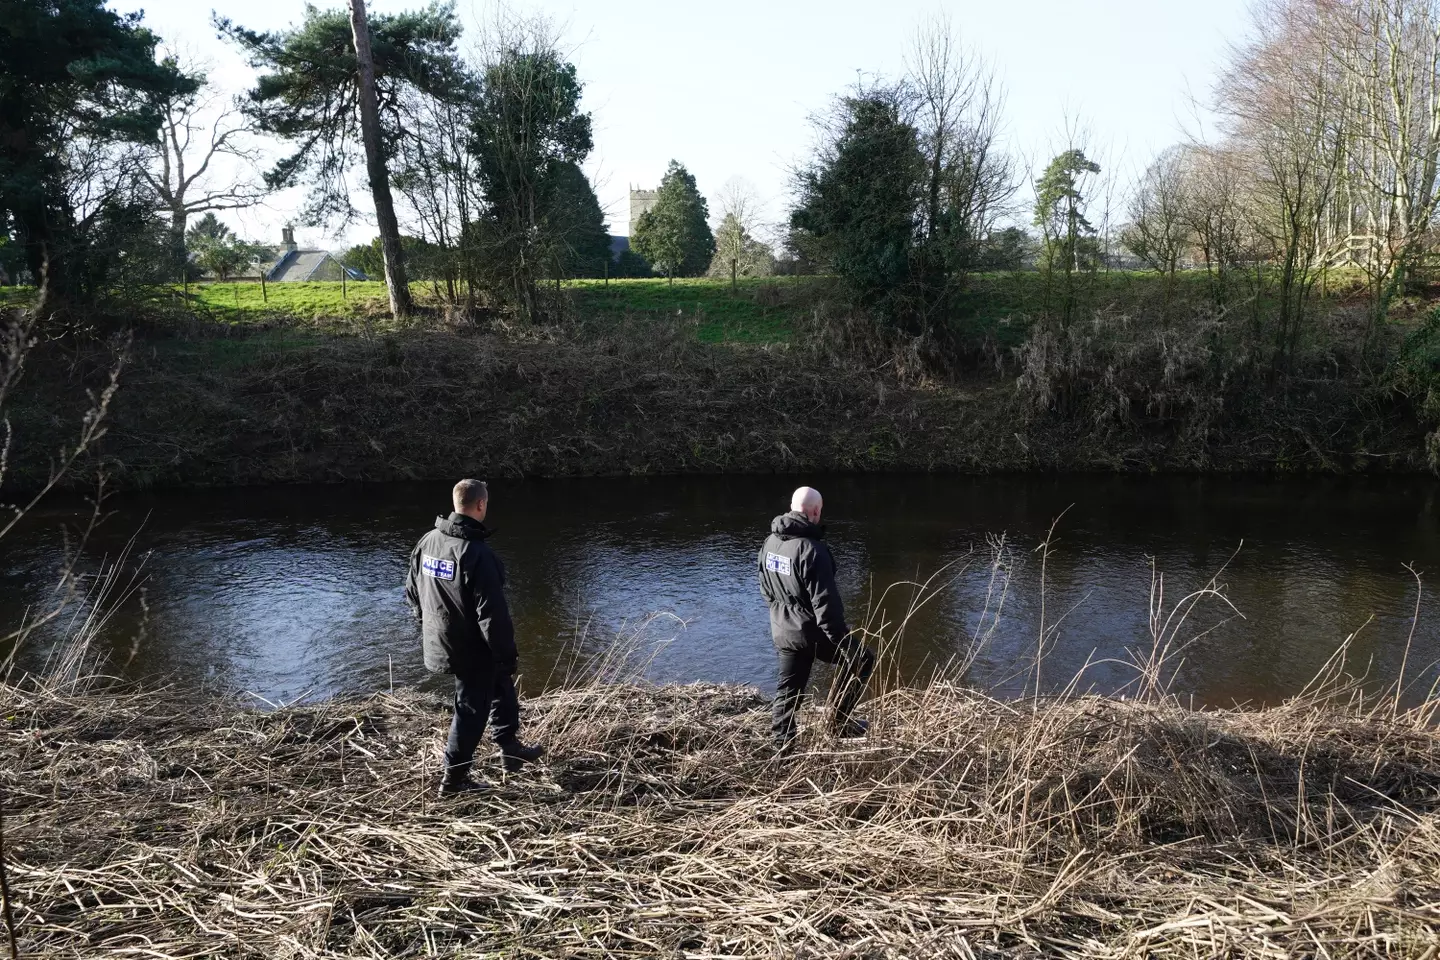 Police have launched a search near the River Wyre in St Michael’s on Wyre, Lancashire.